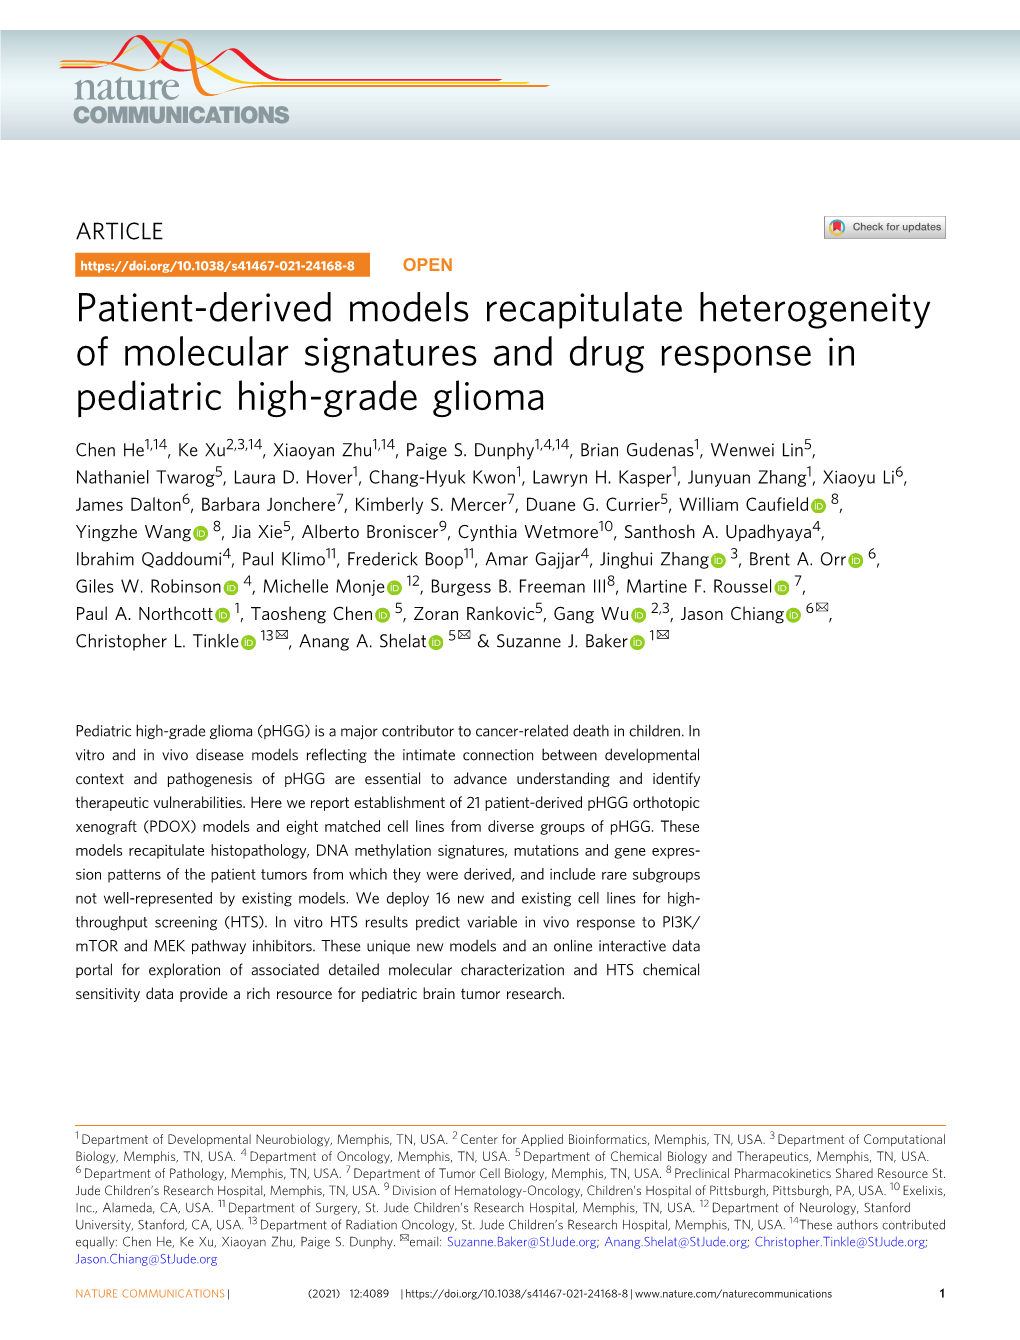 Patient-Derived Models Recapitulate Heterogeneity of Molecular Signatures and Drug Response in Pediatric High-Grade Glioma